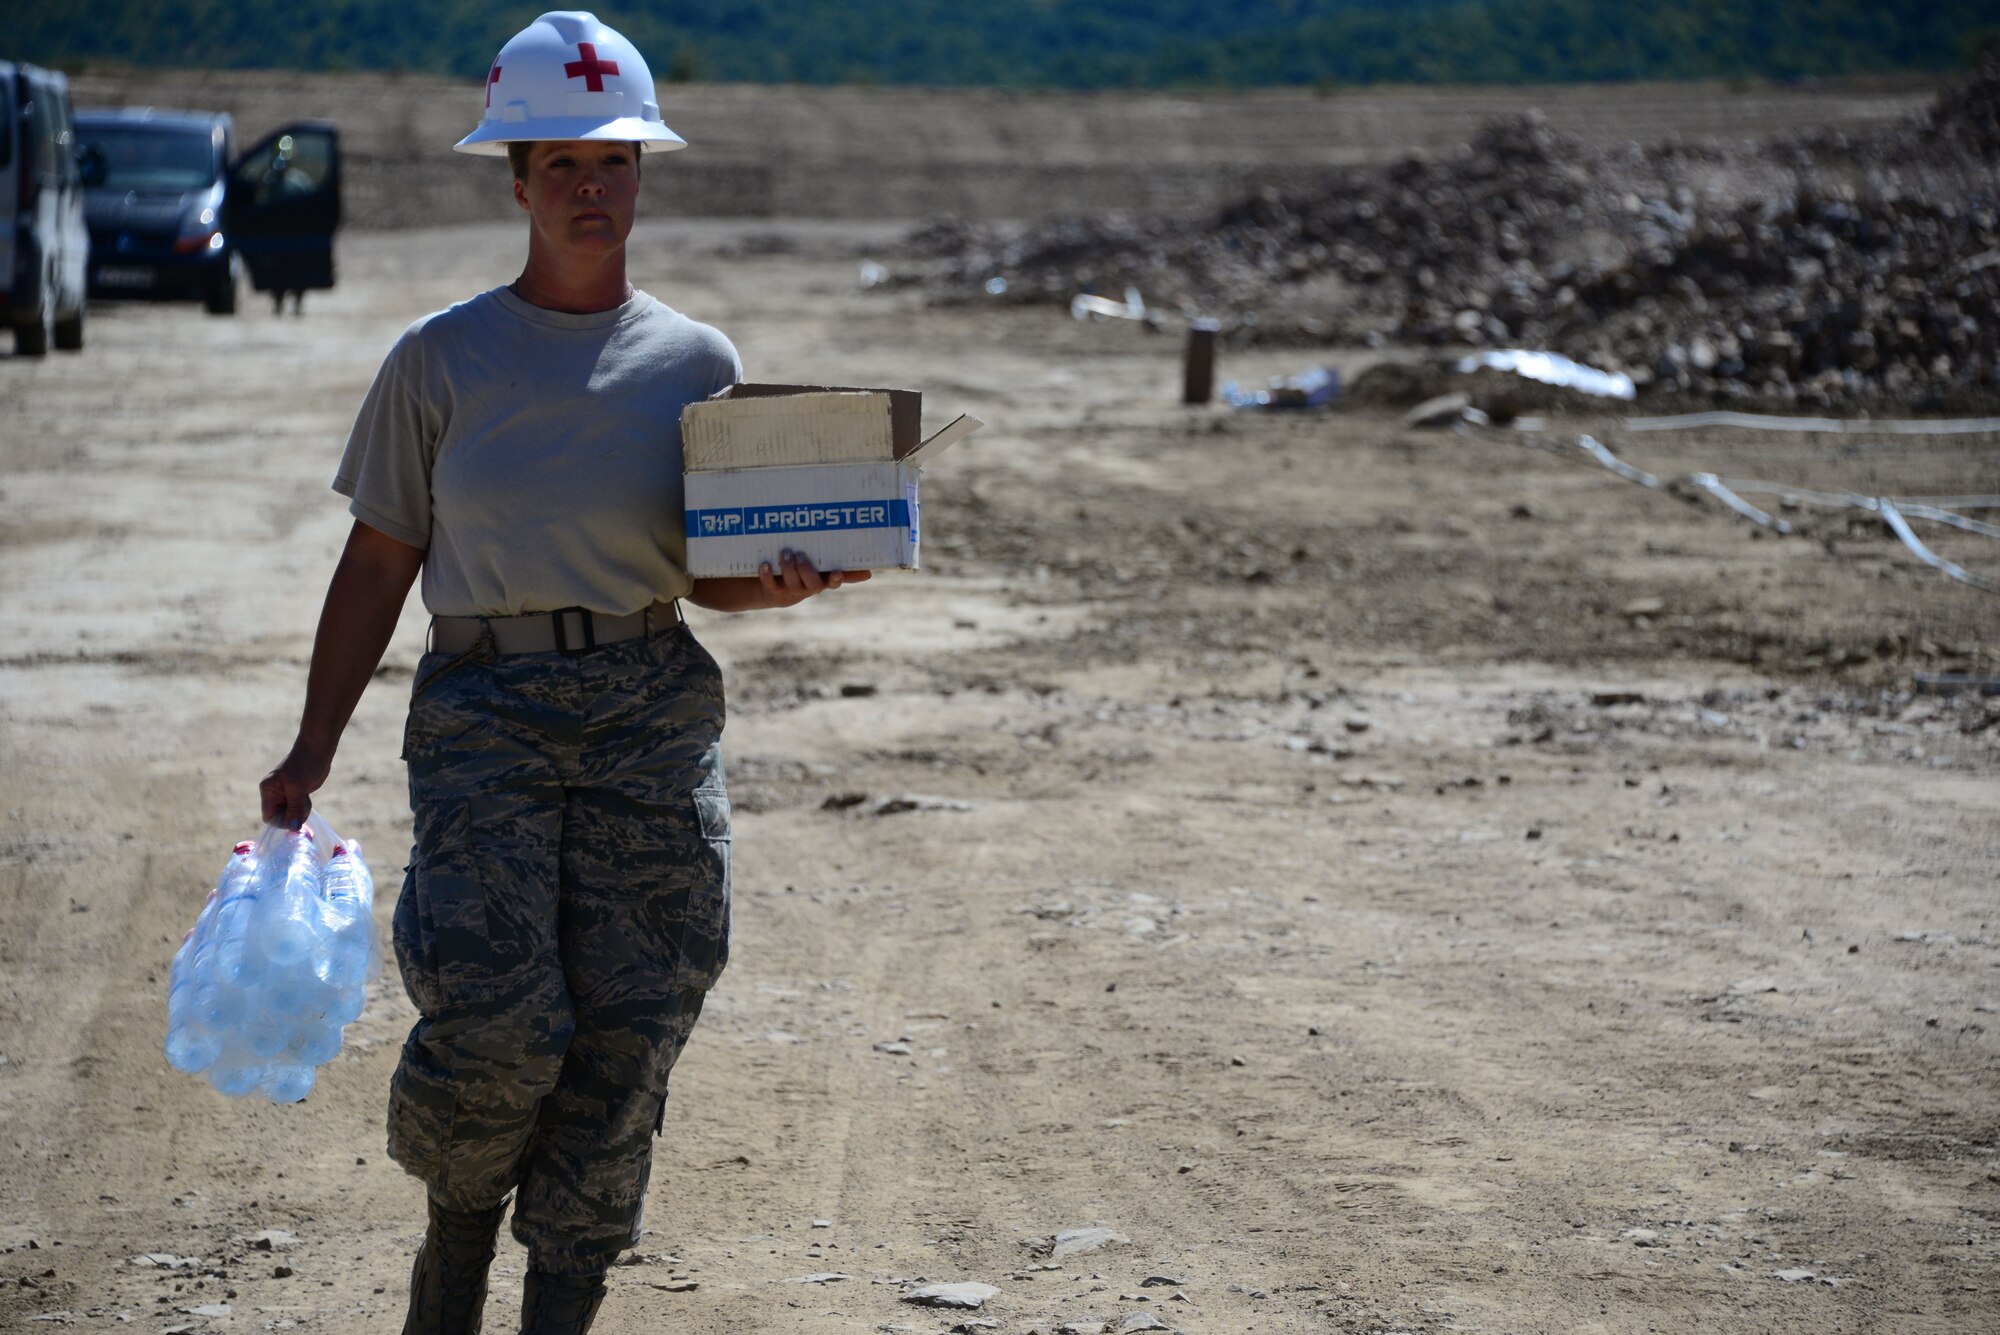 Master Sgt. Rebecca Fraley, medic for the 118th Mission Support Group, Tennessee Air National Guard, construct lightening protection grid work for the Ammo Holding Area, better known as the AHA, Aug. 16, 2016, at Novo Selo Training Area, Bulgaria.  Tennessee National Guard Soldiers and Airmen were on rotations to complete thier portions of projects as part of Operation Resolute Castle 16, an ongoing operation of military construction to build up Eastern European base infrastructure and help strengthen ties between Tennessee's state partnership with Bulgaria. (U.S. Air National Guard photo by Master Sgt. Kendra M. Owenby, 134 ARW Public Affairs)